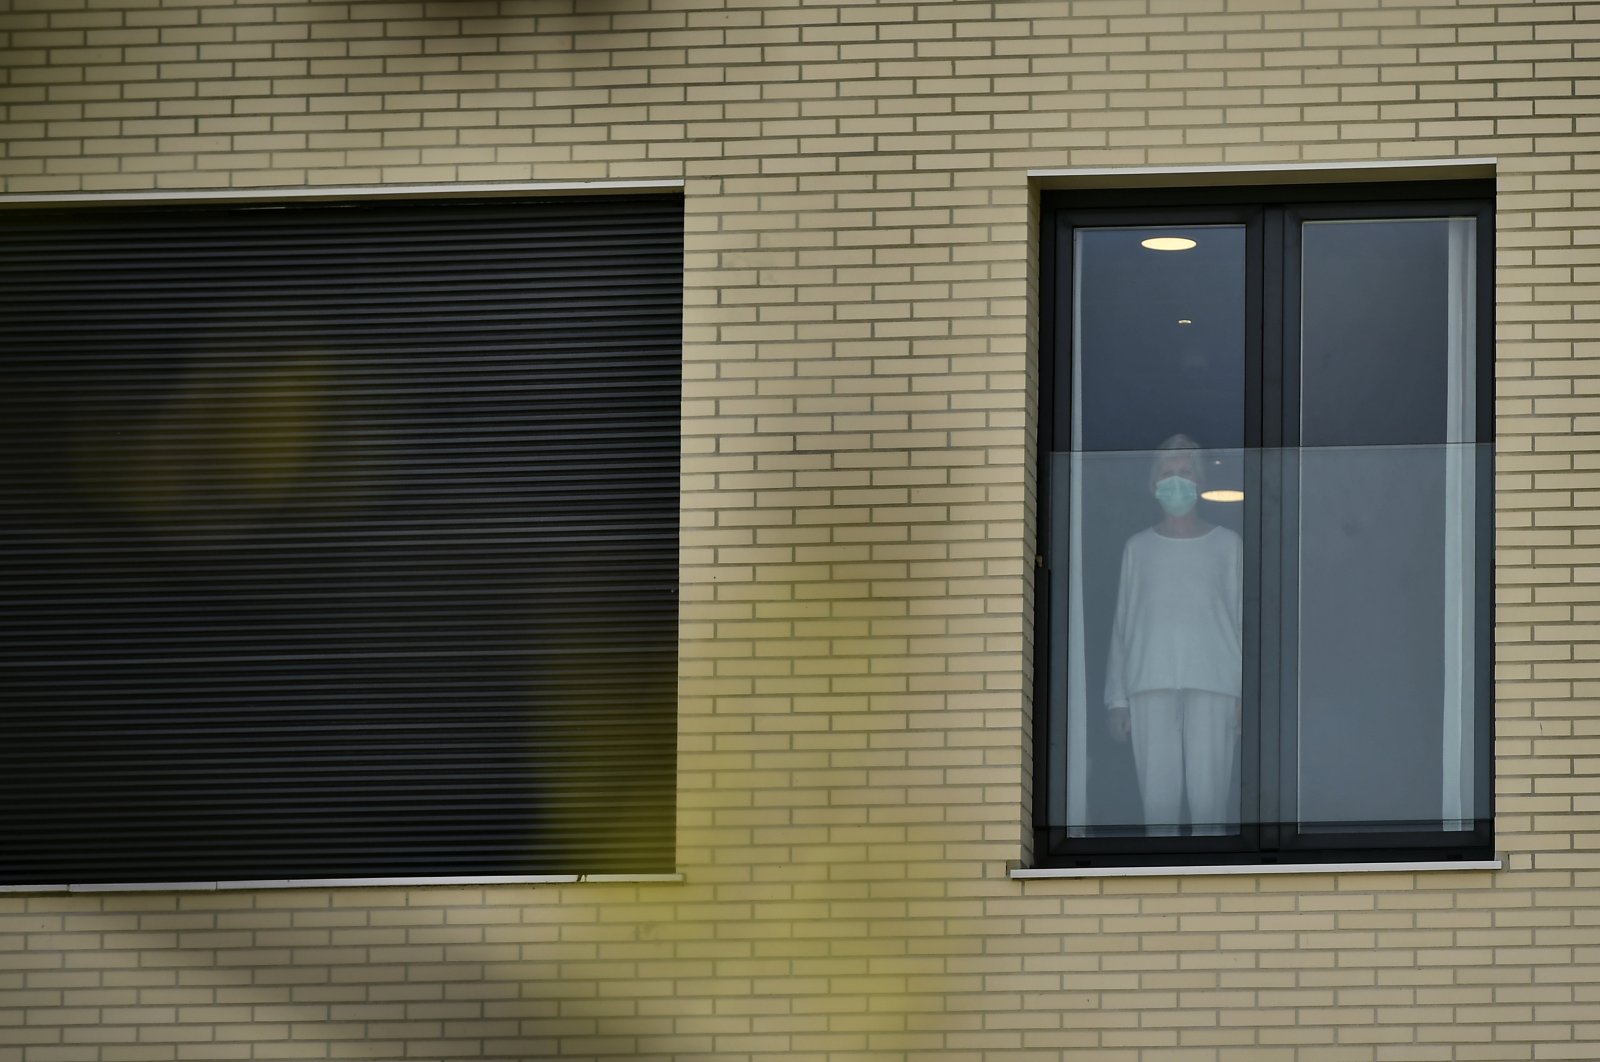 An elderly woman wearing a protective mask looks on through the window at San Martin nursing home, Vitoria, Thursday, March 19, 2020. (AP Photo)